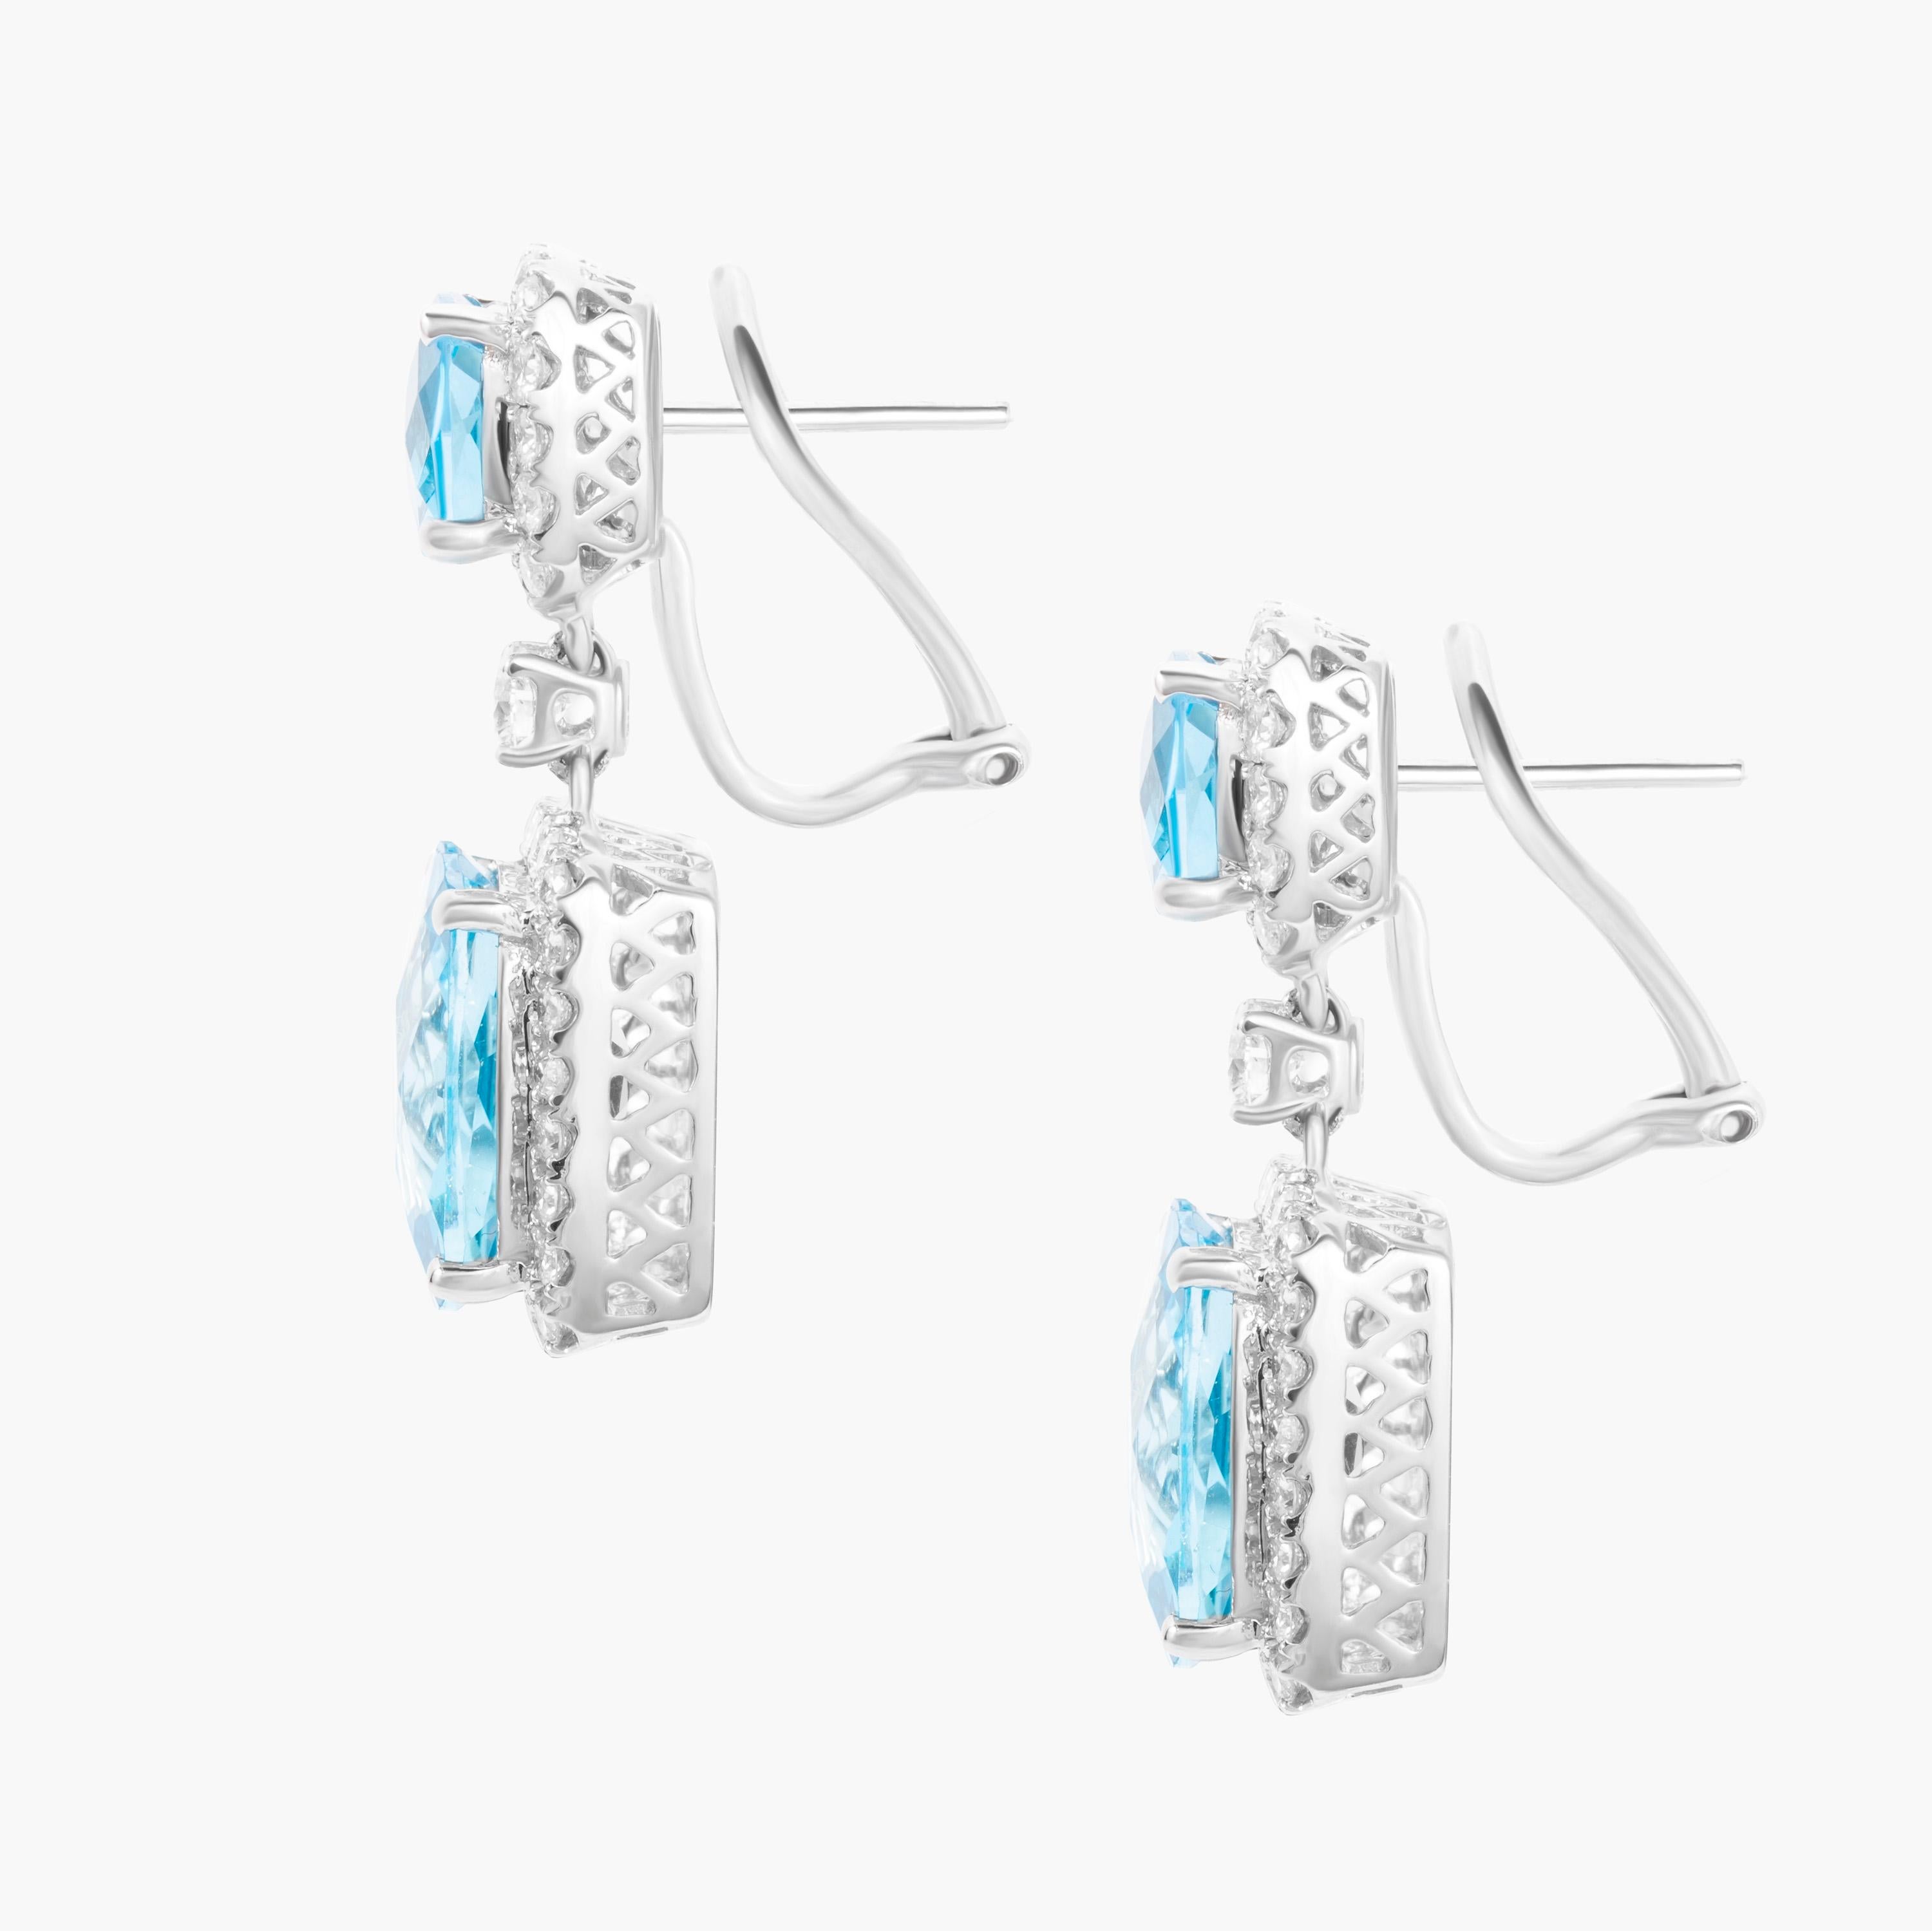 Set in 18K white gold, these drop earrings feature four cushion-cut blue topaz gemstones (total carat weight 14.05 carats) and accented with 1.46 carats of brilliant round diamonds.  Earring length 3cm.

Composition: 
18K White Gold 
4 Blue Topaz: